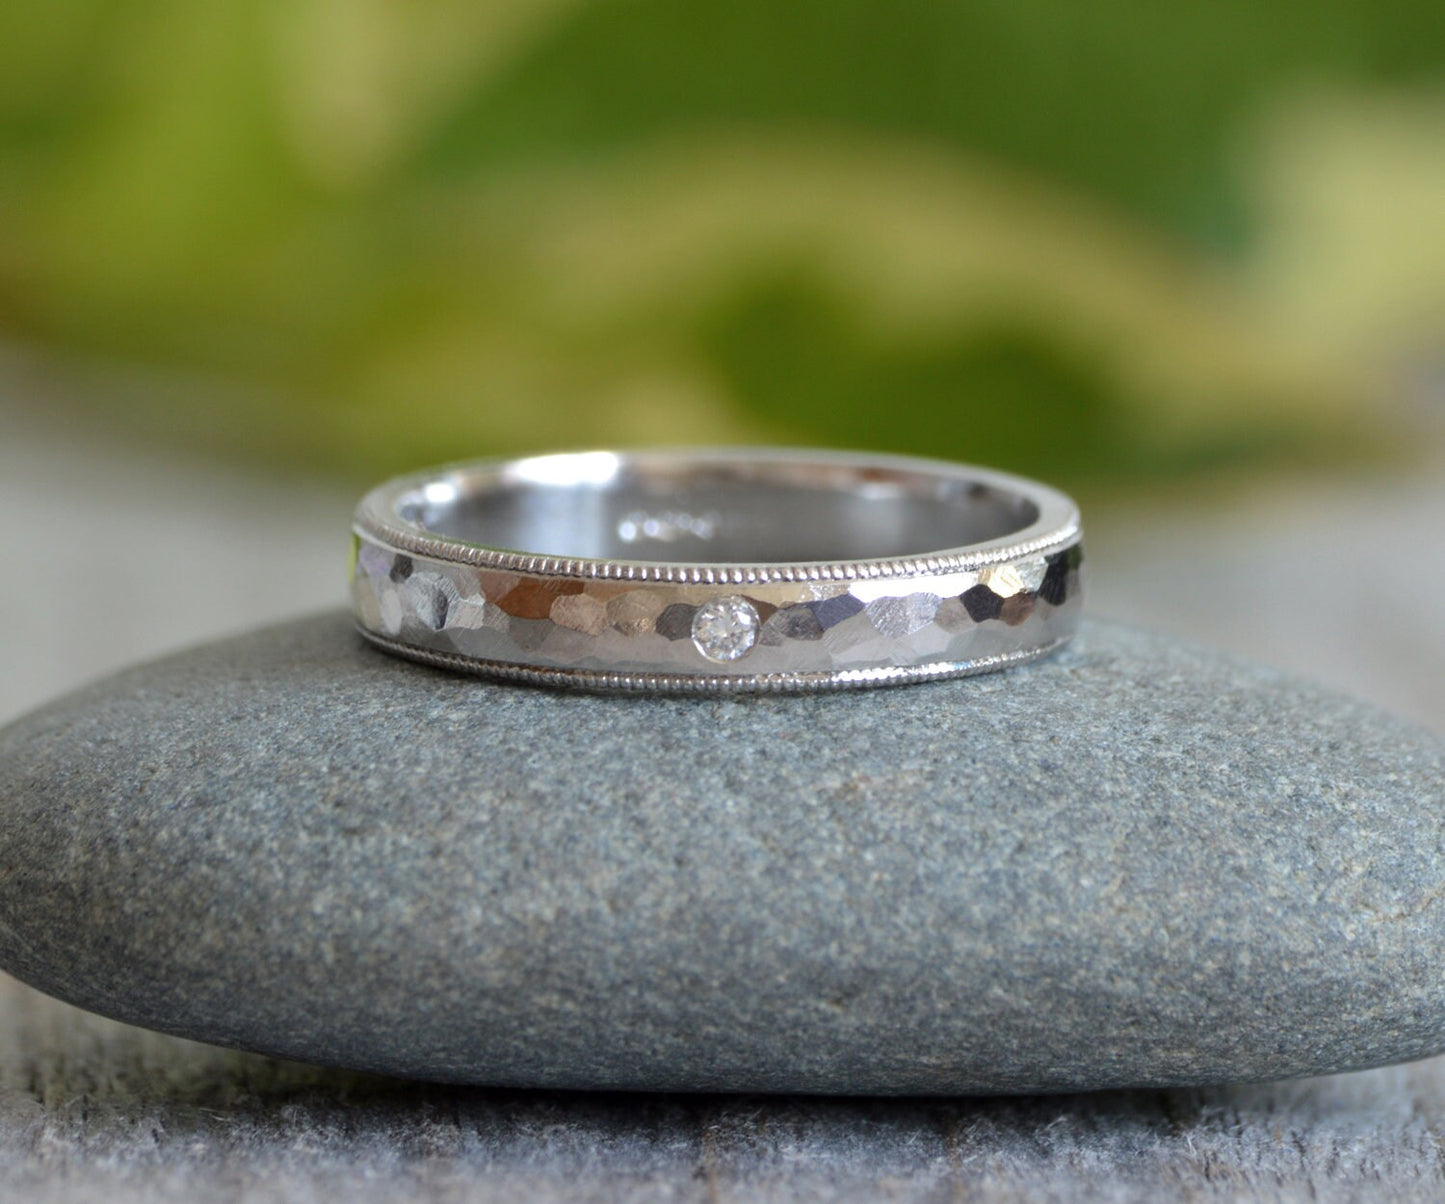 Platinum Milgrain Wedding Band With A Diamond, Milgrain Platinum Wedding Ring With Diamond, Rustic Wedding Band, Made To Order, 3mm Ring